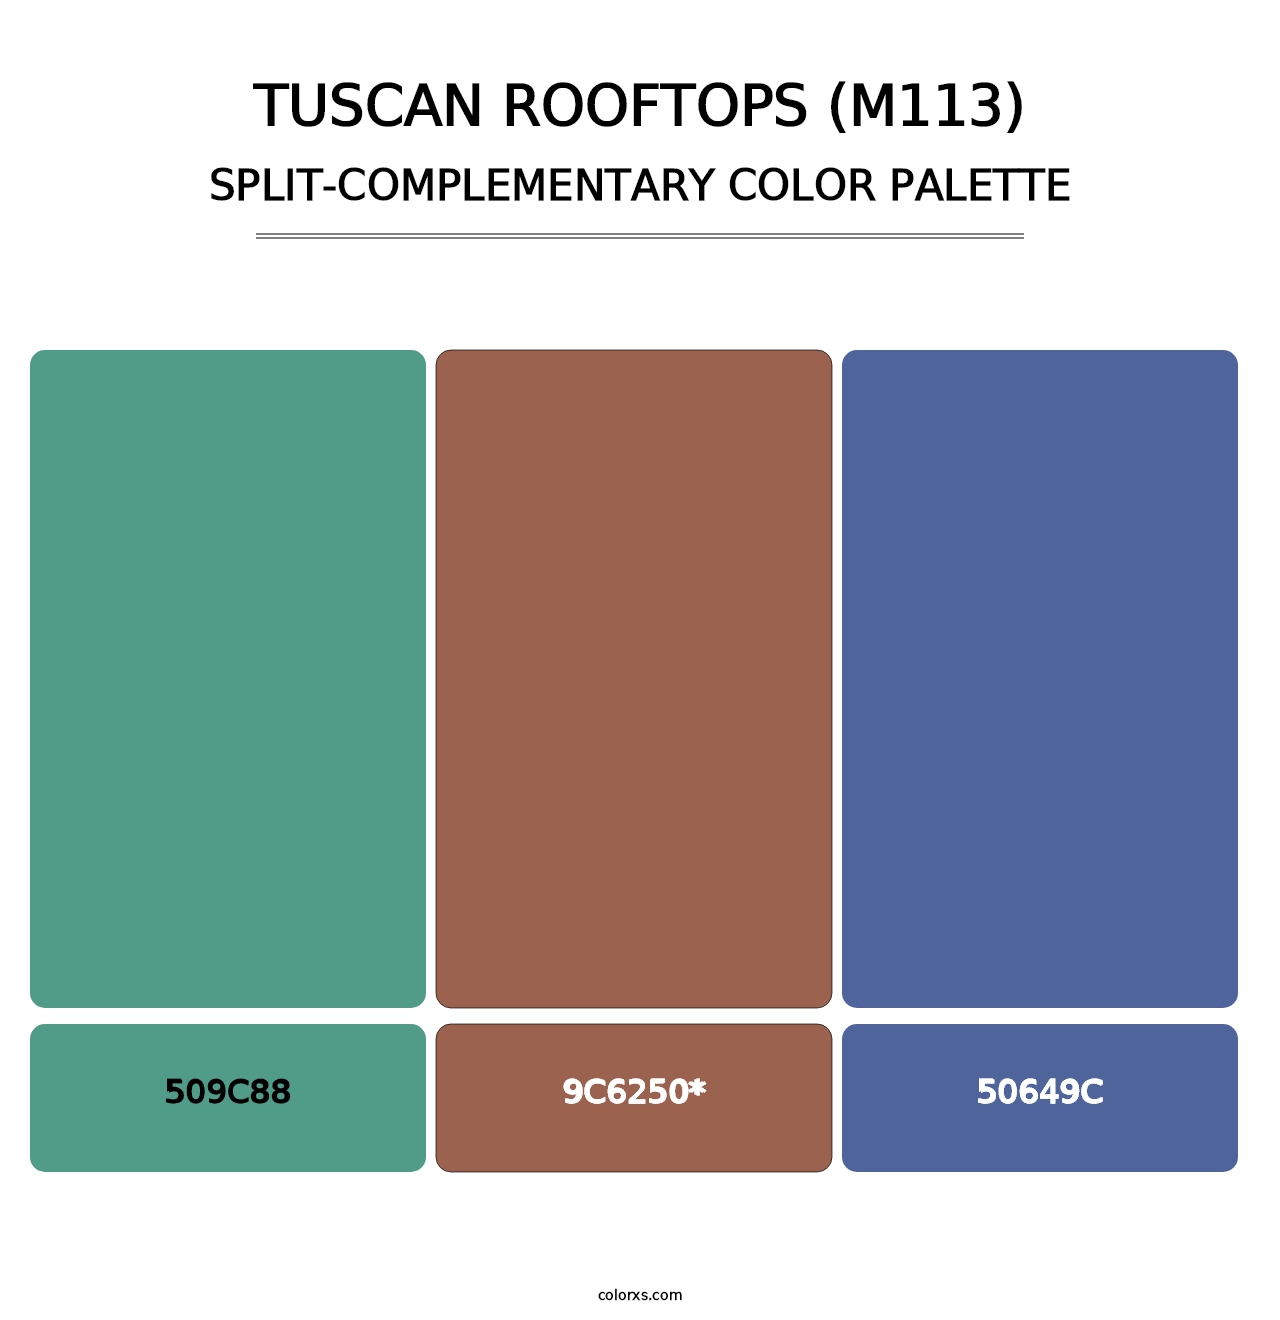 Tuscan Rooftops (M113) - Split-Complementary Color Palette